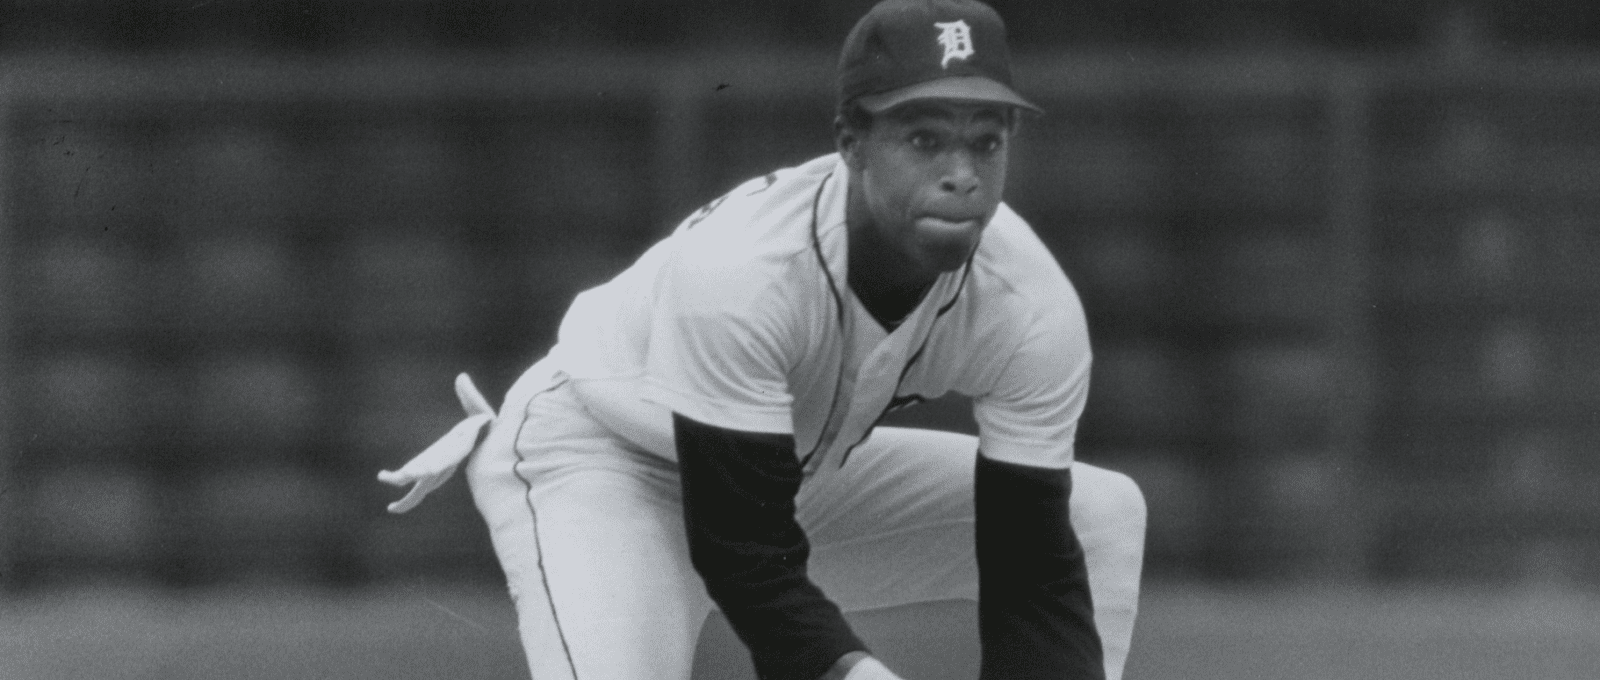 Tigers Set to Retire No. 1 in Honor of Sweet Lou Whitaker at Comerica  Park on Saturday, August 6 - Ilitch Companies News Hub